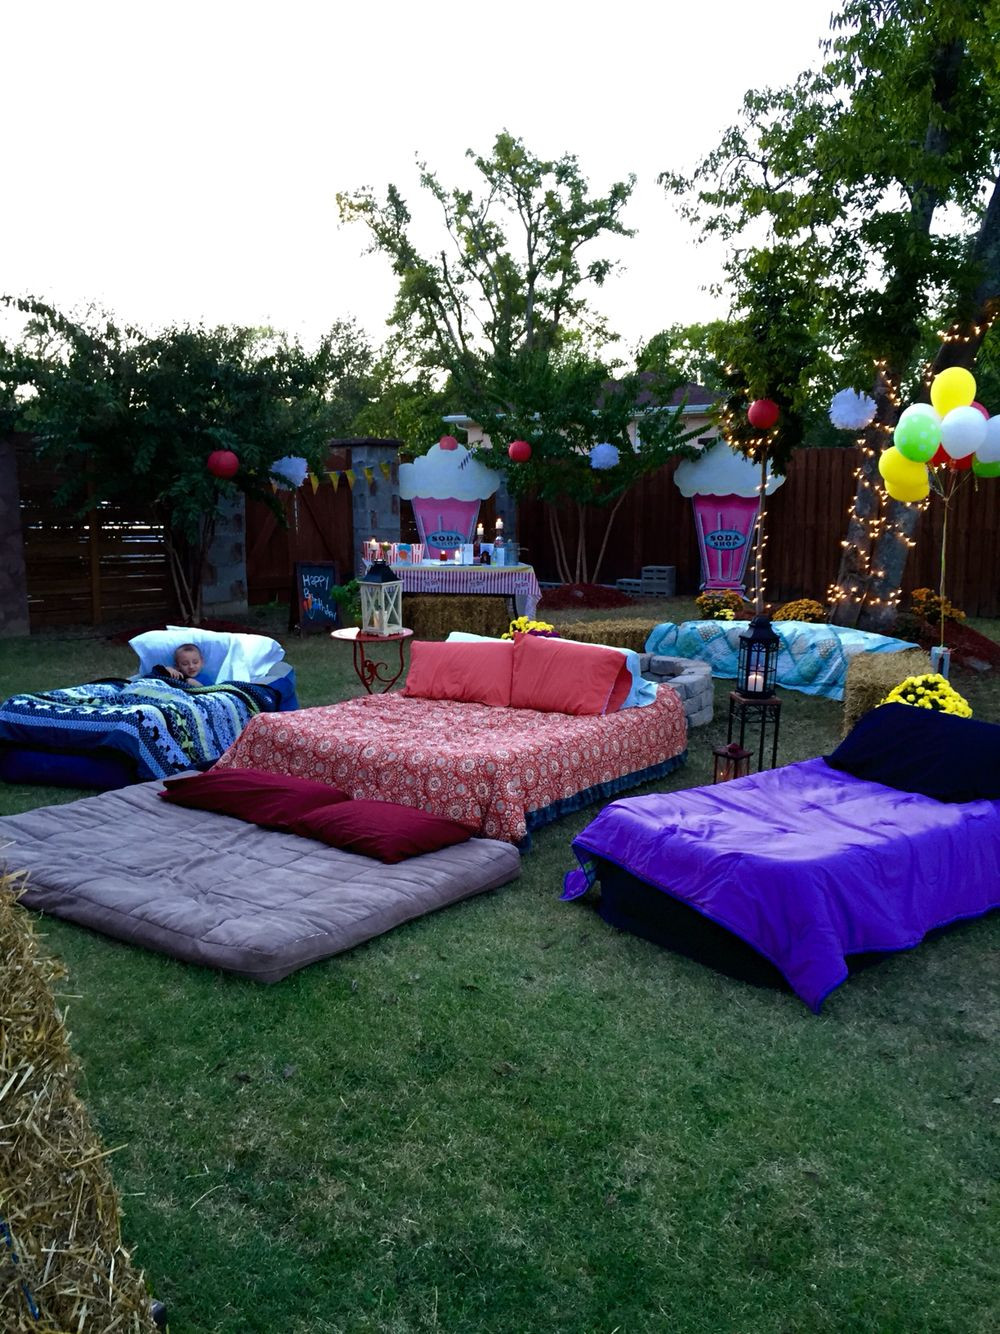 Backyard Movie Party Ideas
 Air mattresses for movie night outside